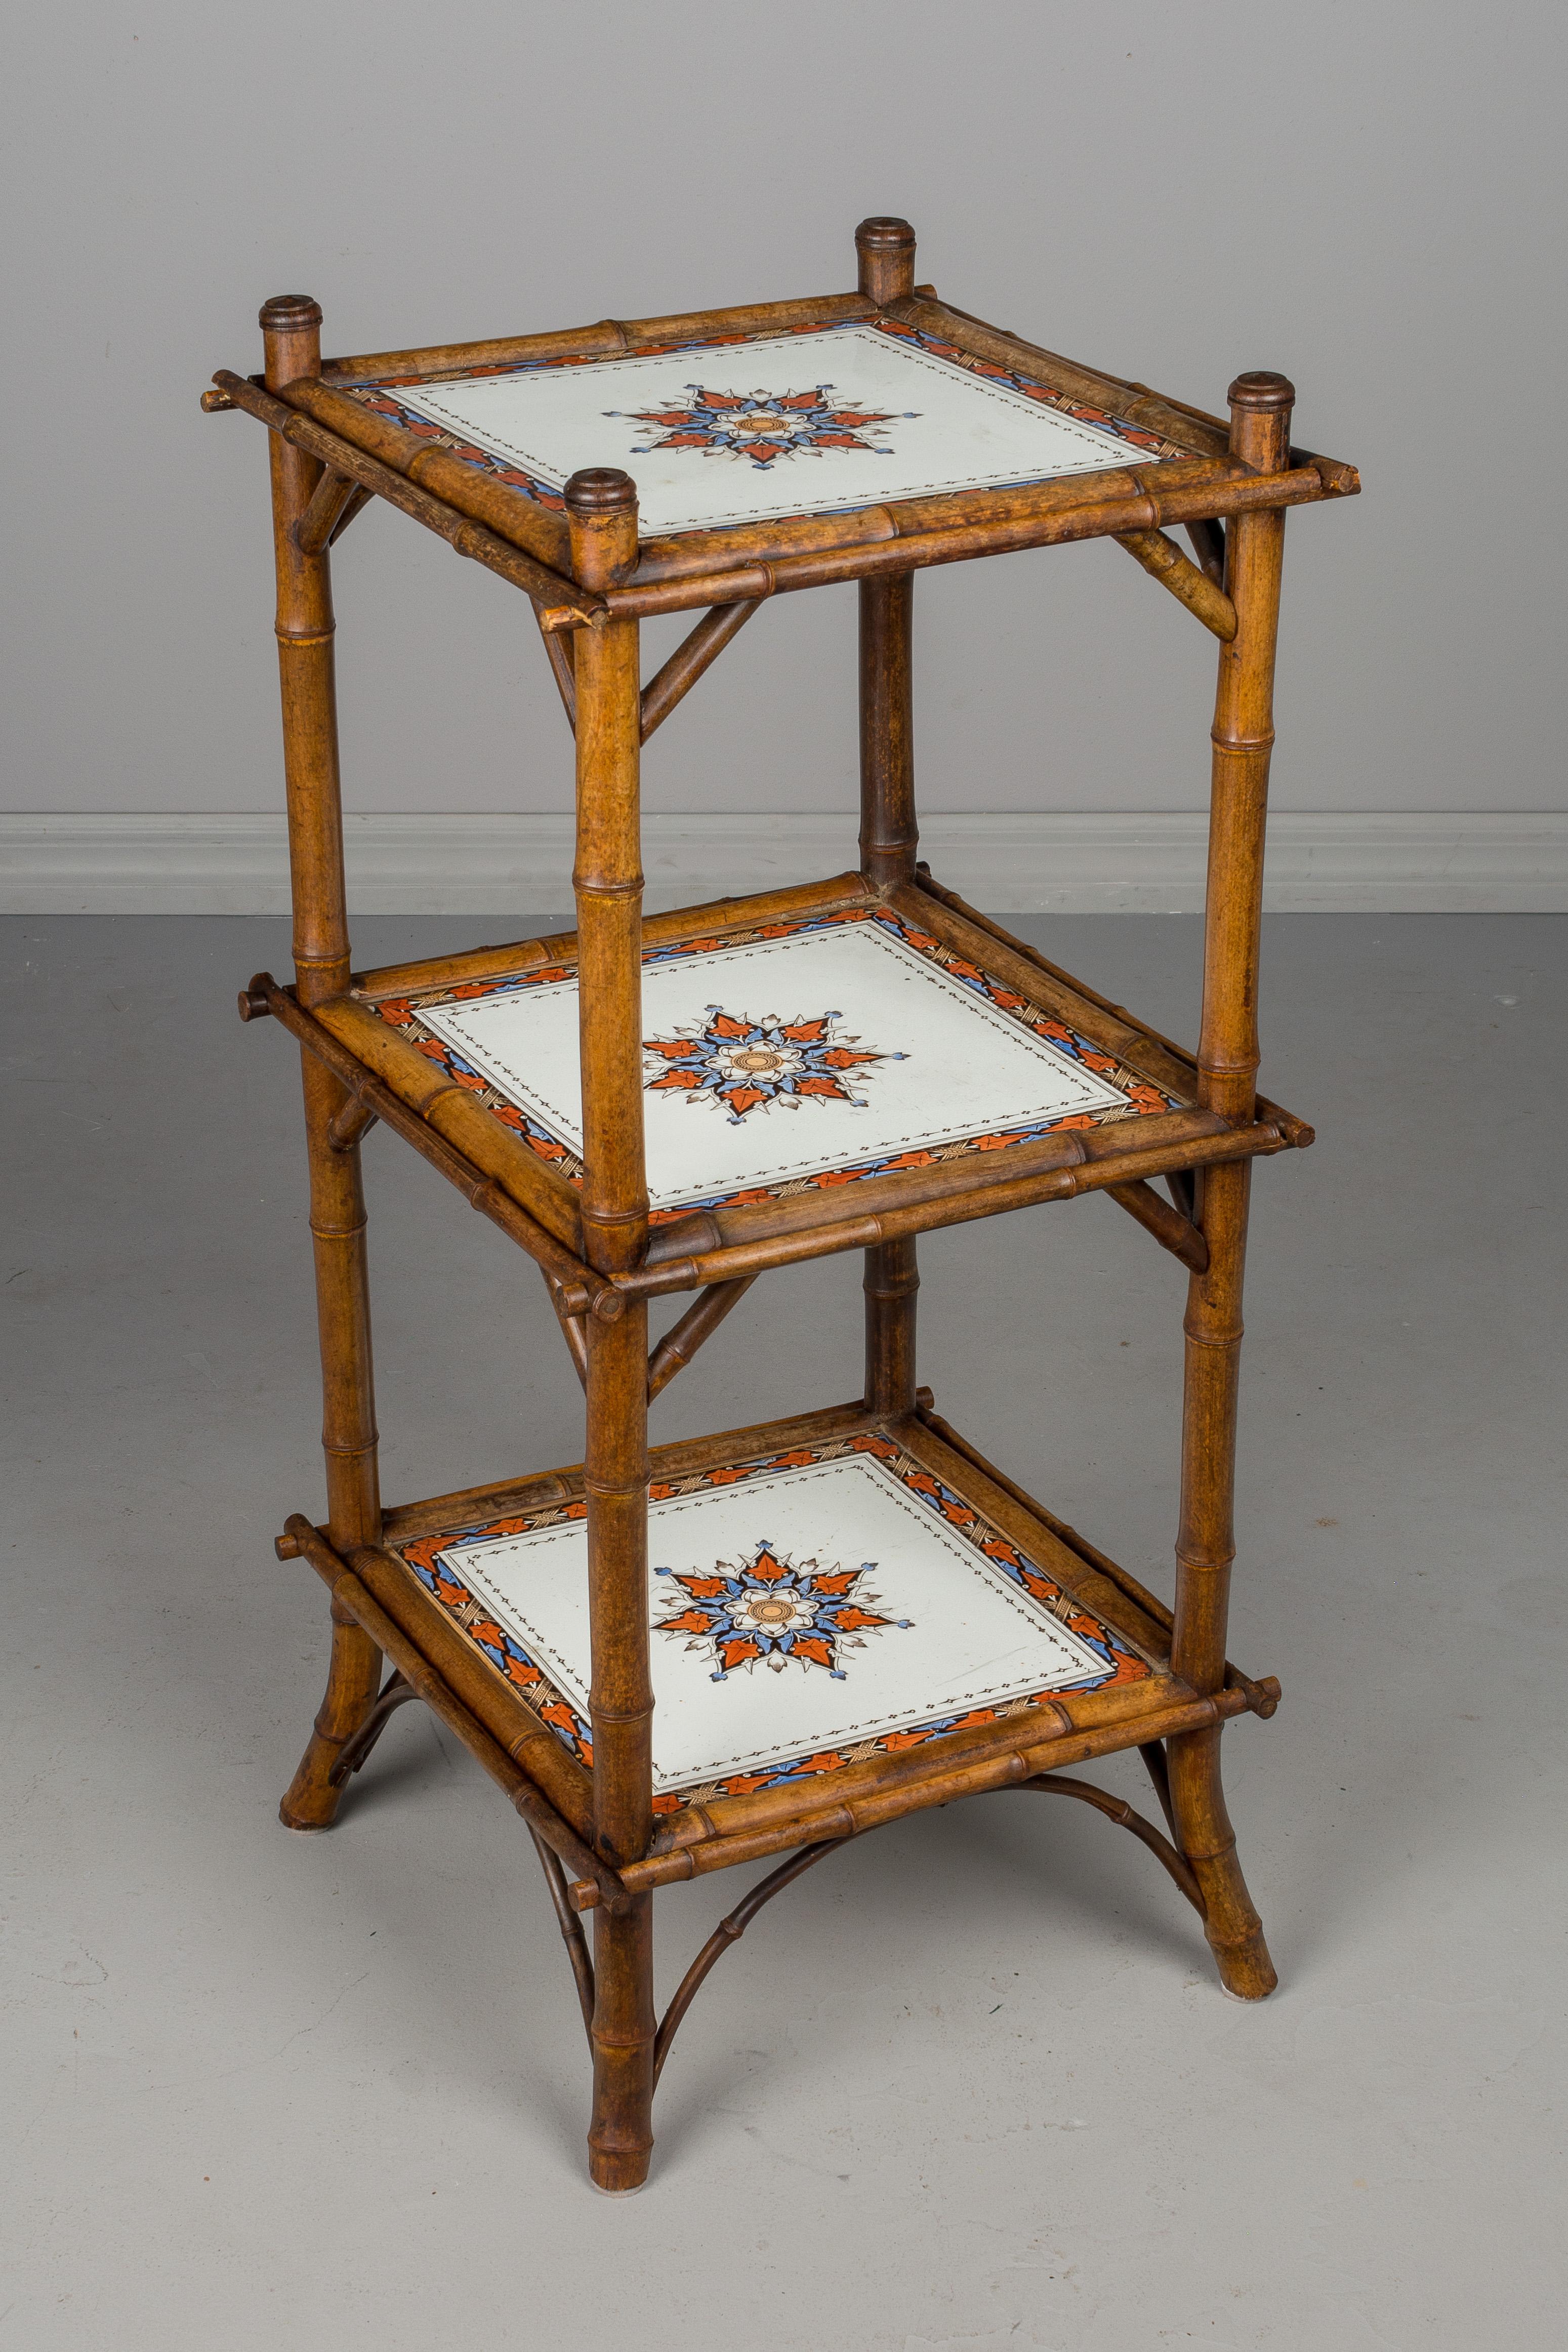 French Provincial 19th Century French Bamboo and Ceramic Tile Stand